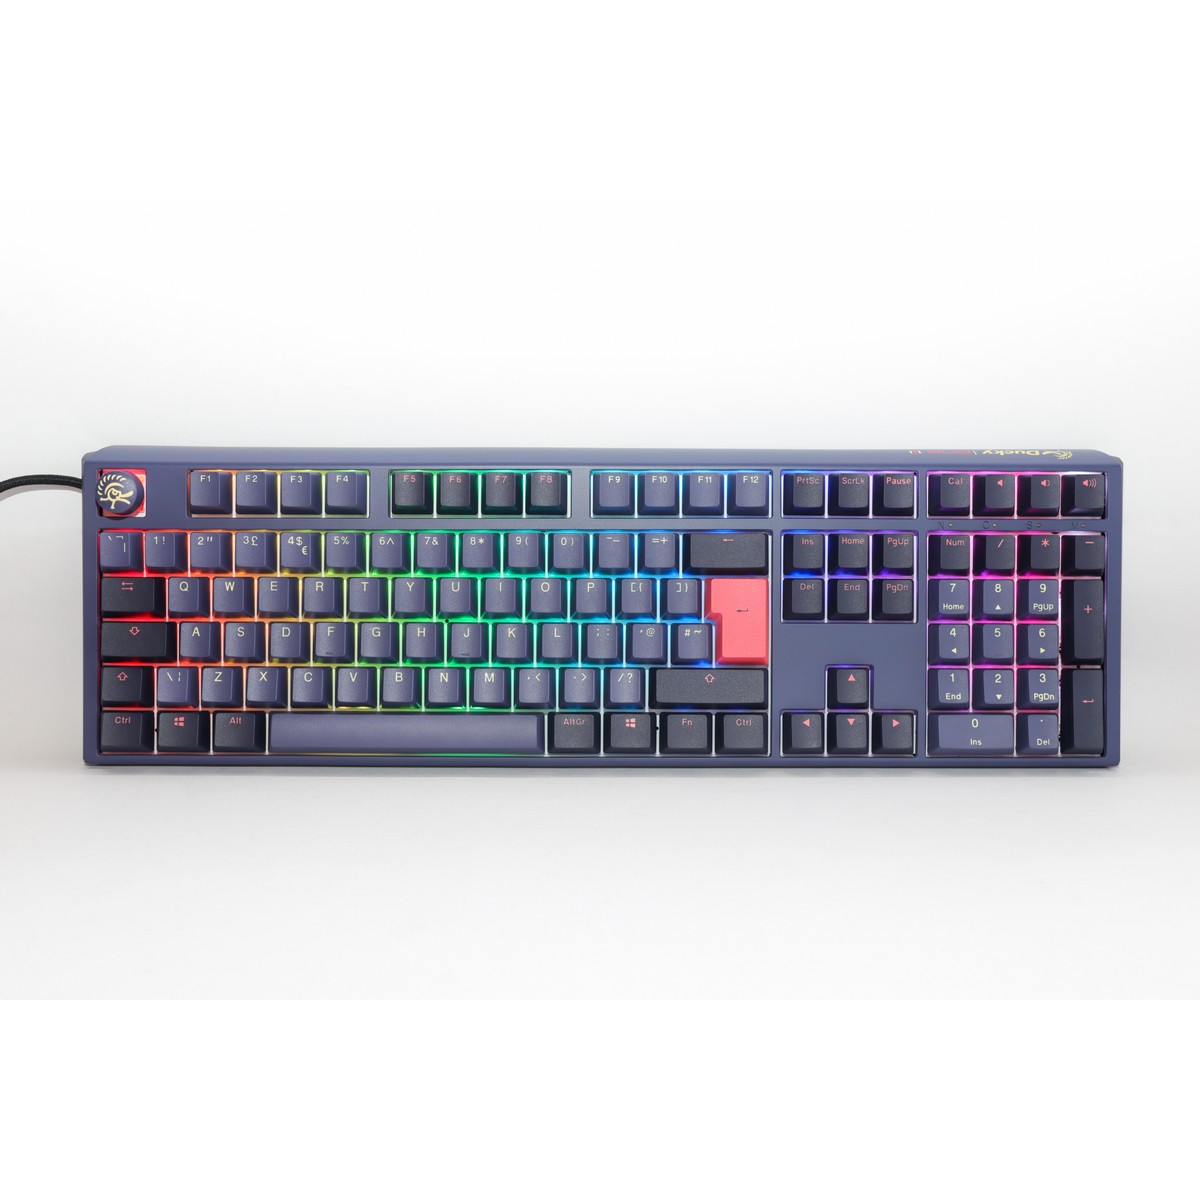 Ducky One 3 Cosmic USB RGB Mechanical Gaming Keyboard Cherry MX Silent Red Switch - UK Layout